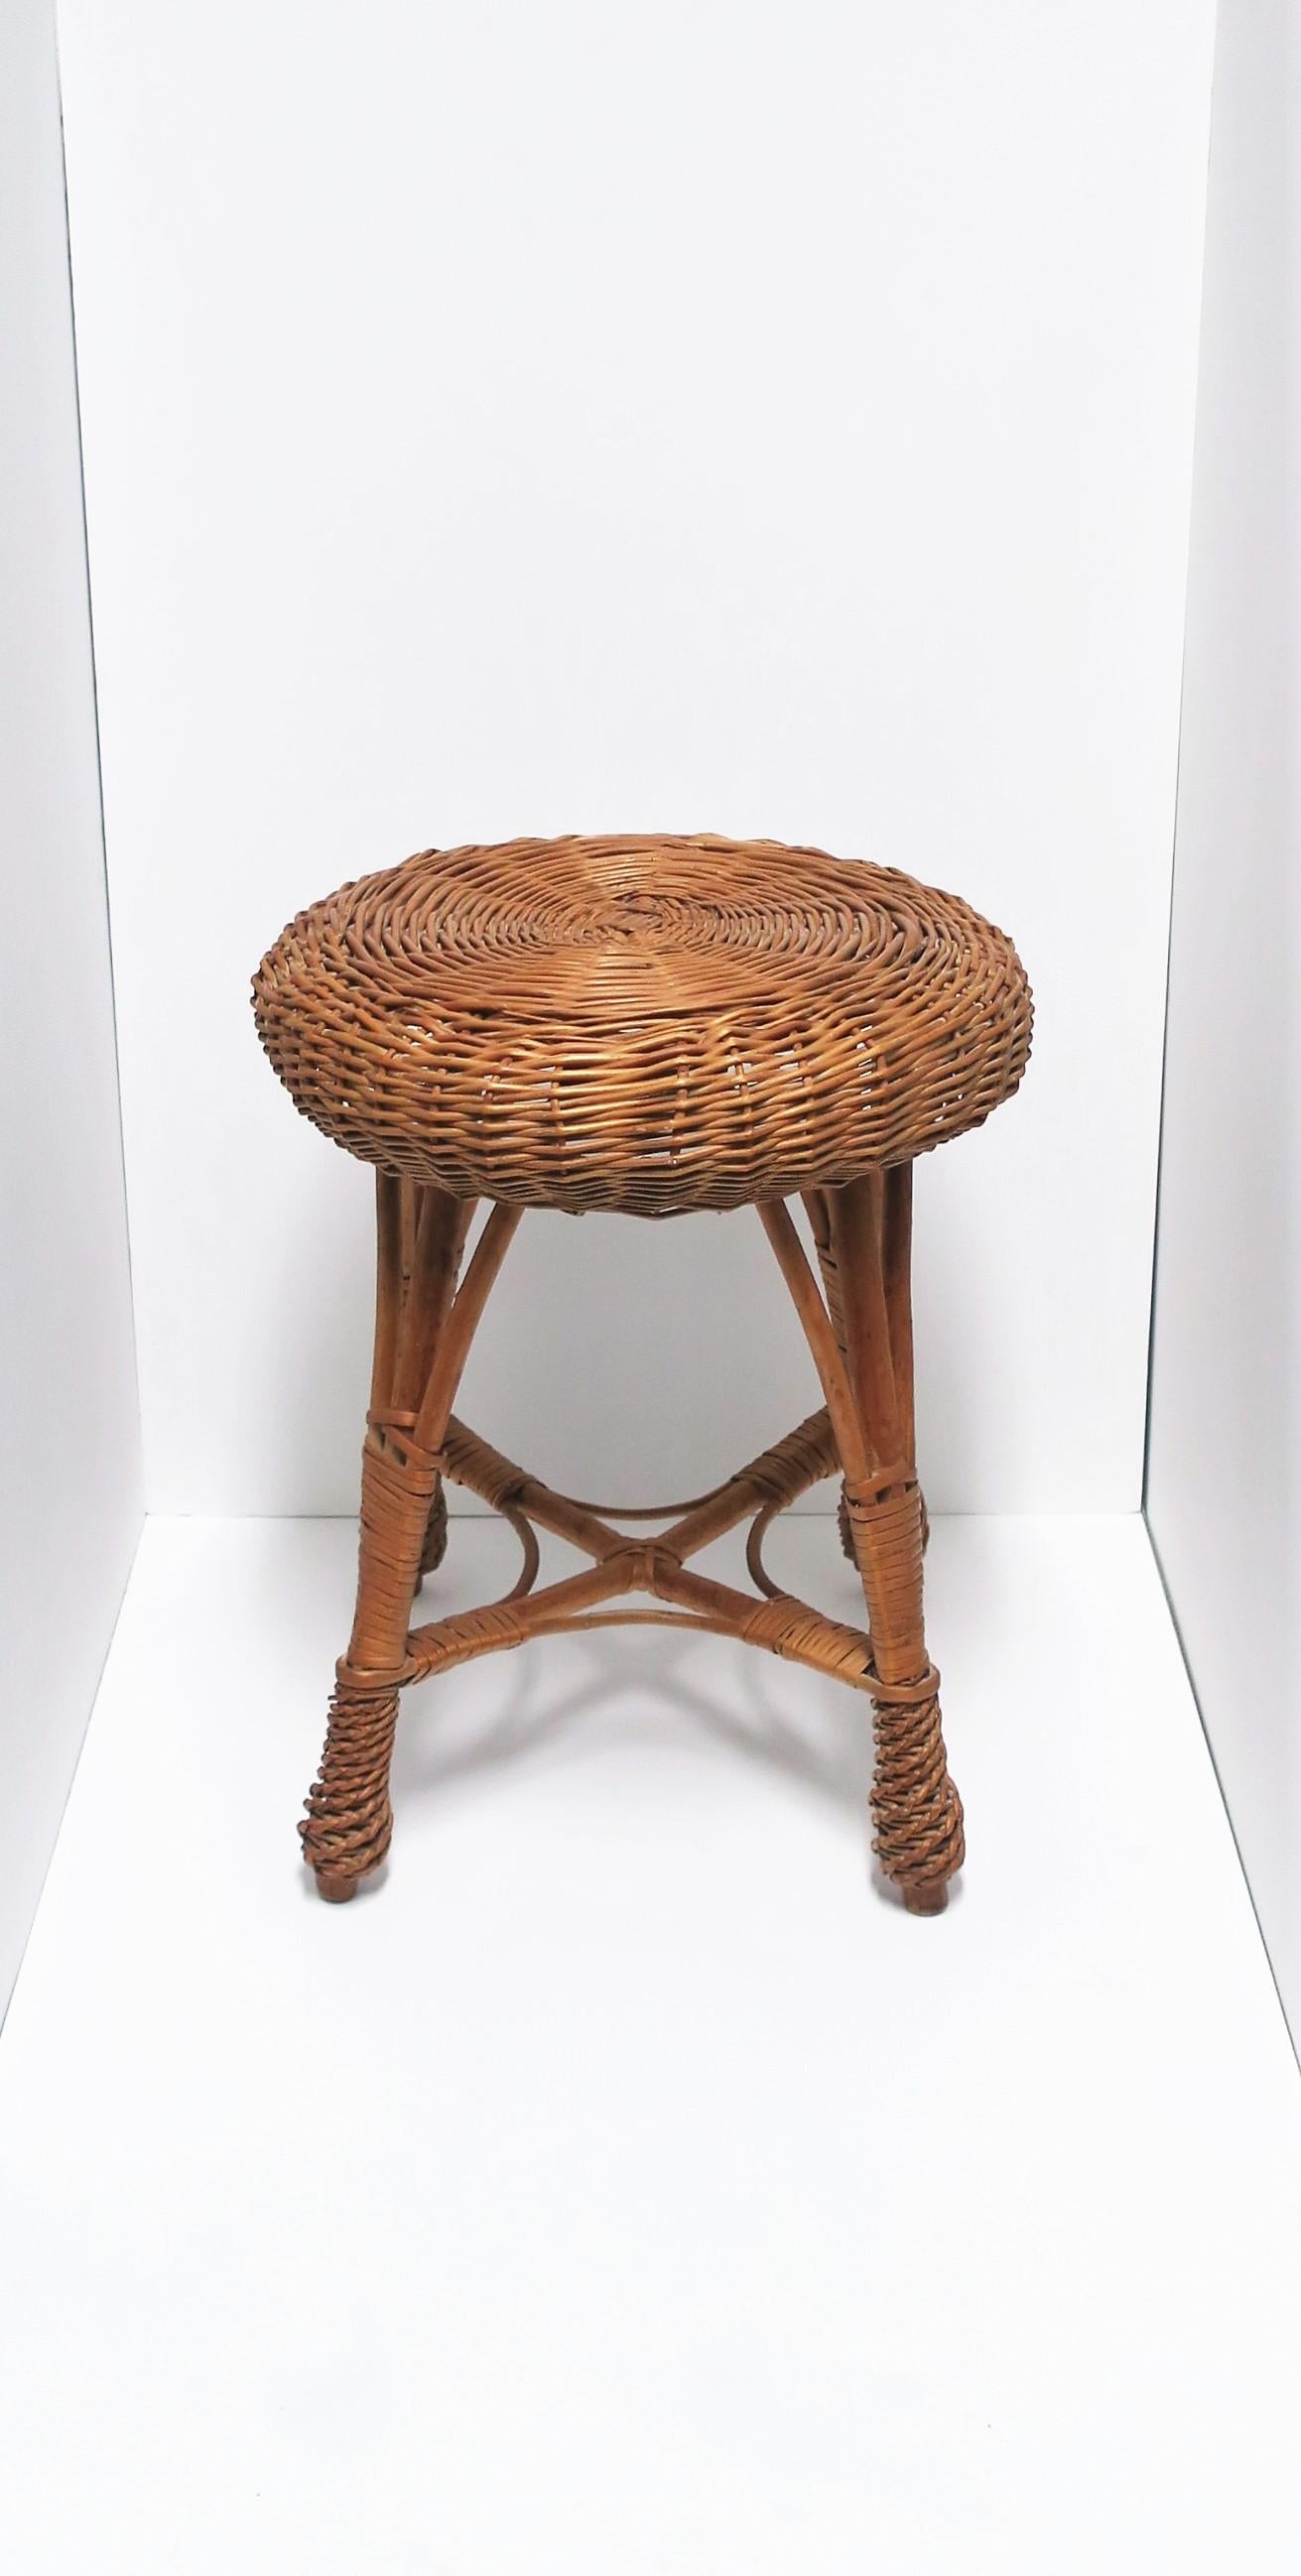 A vintage round wicker stool, circa mid-20th century, USA. Piece could also work as a side or drinks table providing there's a stable environment on top for drink (e.g. coffee table book.)

Piece measures: 15